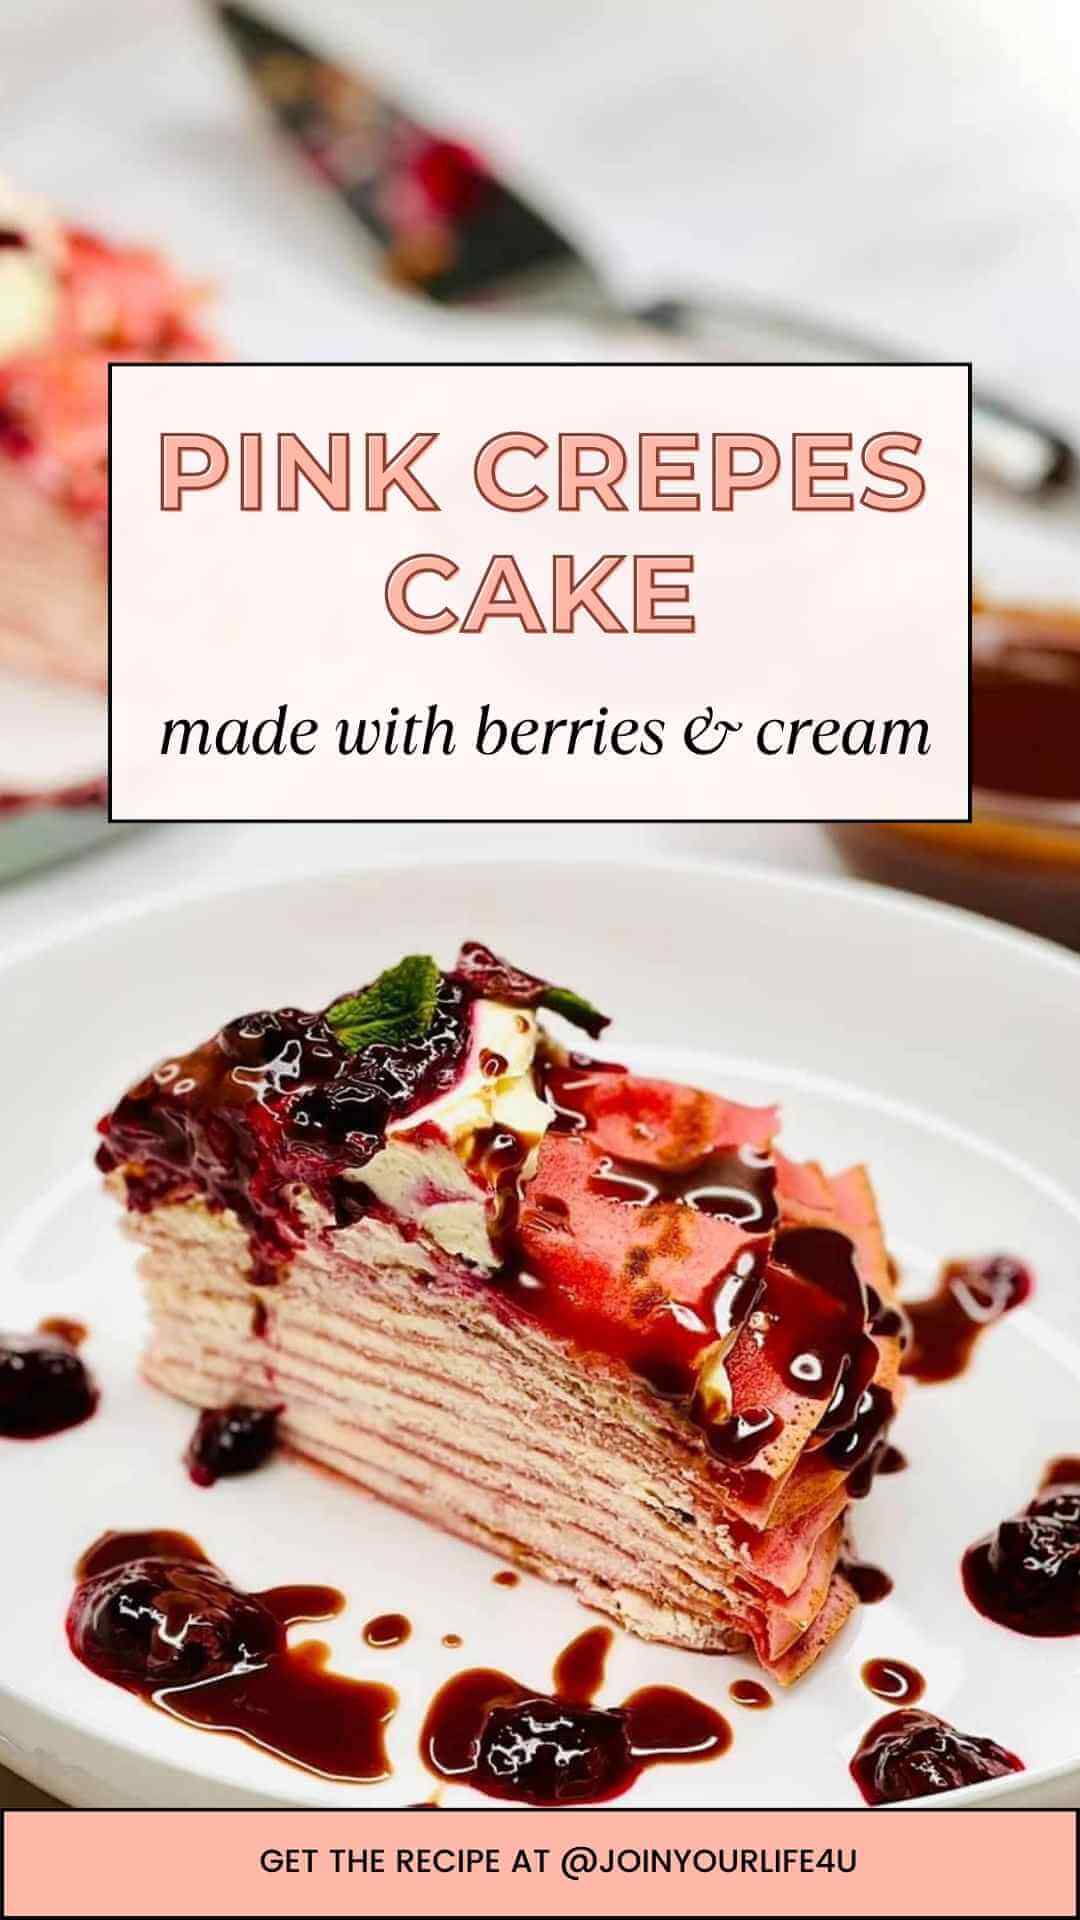 Berry and Cream Pink Crepes Cake featuring layers of delicate crepes filled with cream cheese filling. Decorated with vibrant berry sauce, decadent chocolate ganache, and fresh mint leaves.